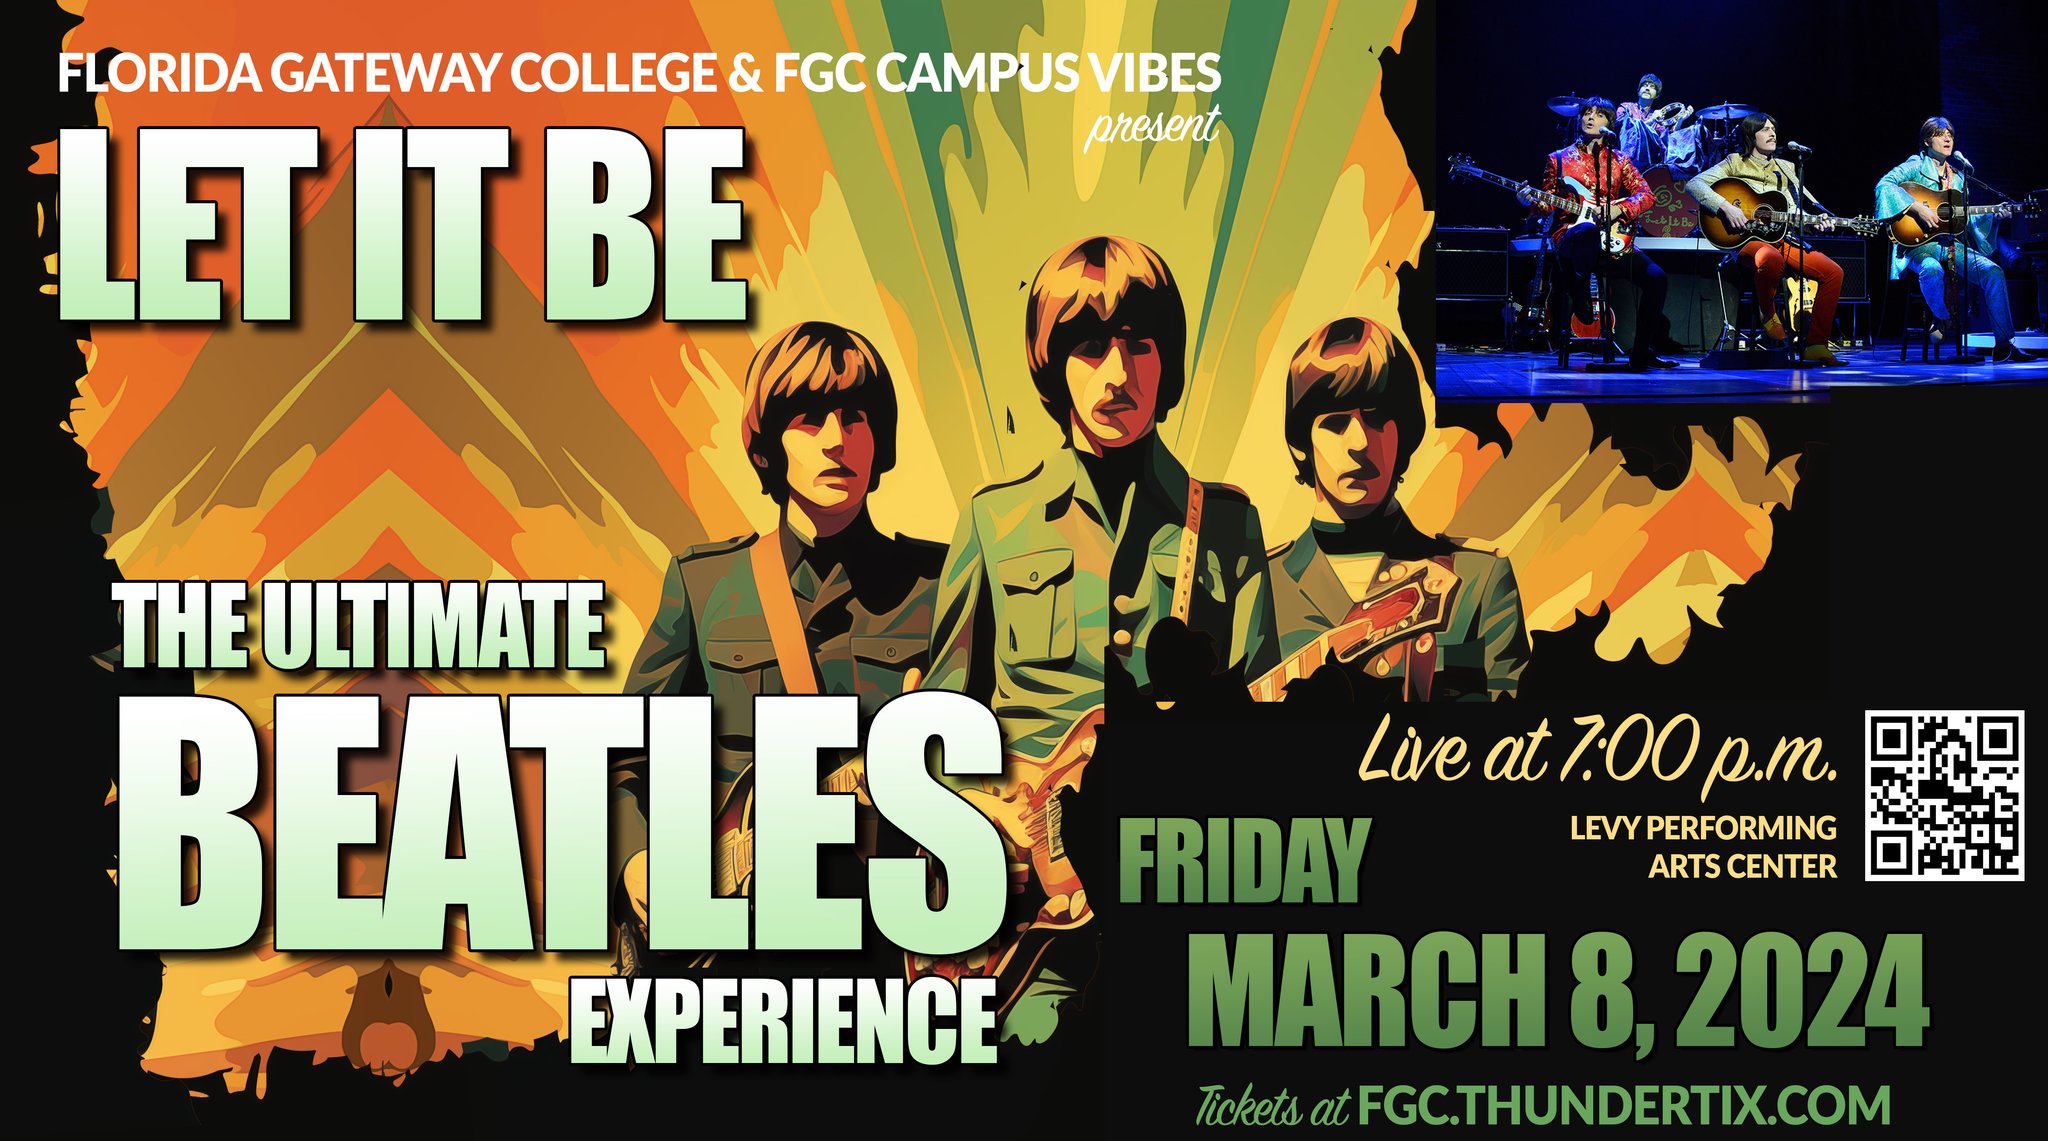 Beatles Tribute Show to Kick Off FGC Campus Vibes: Arts & Music Showcase